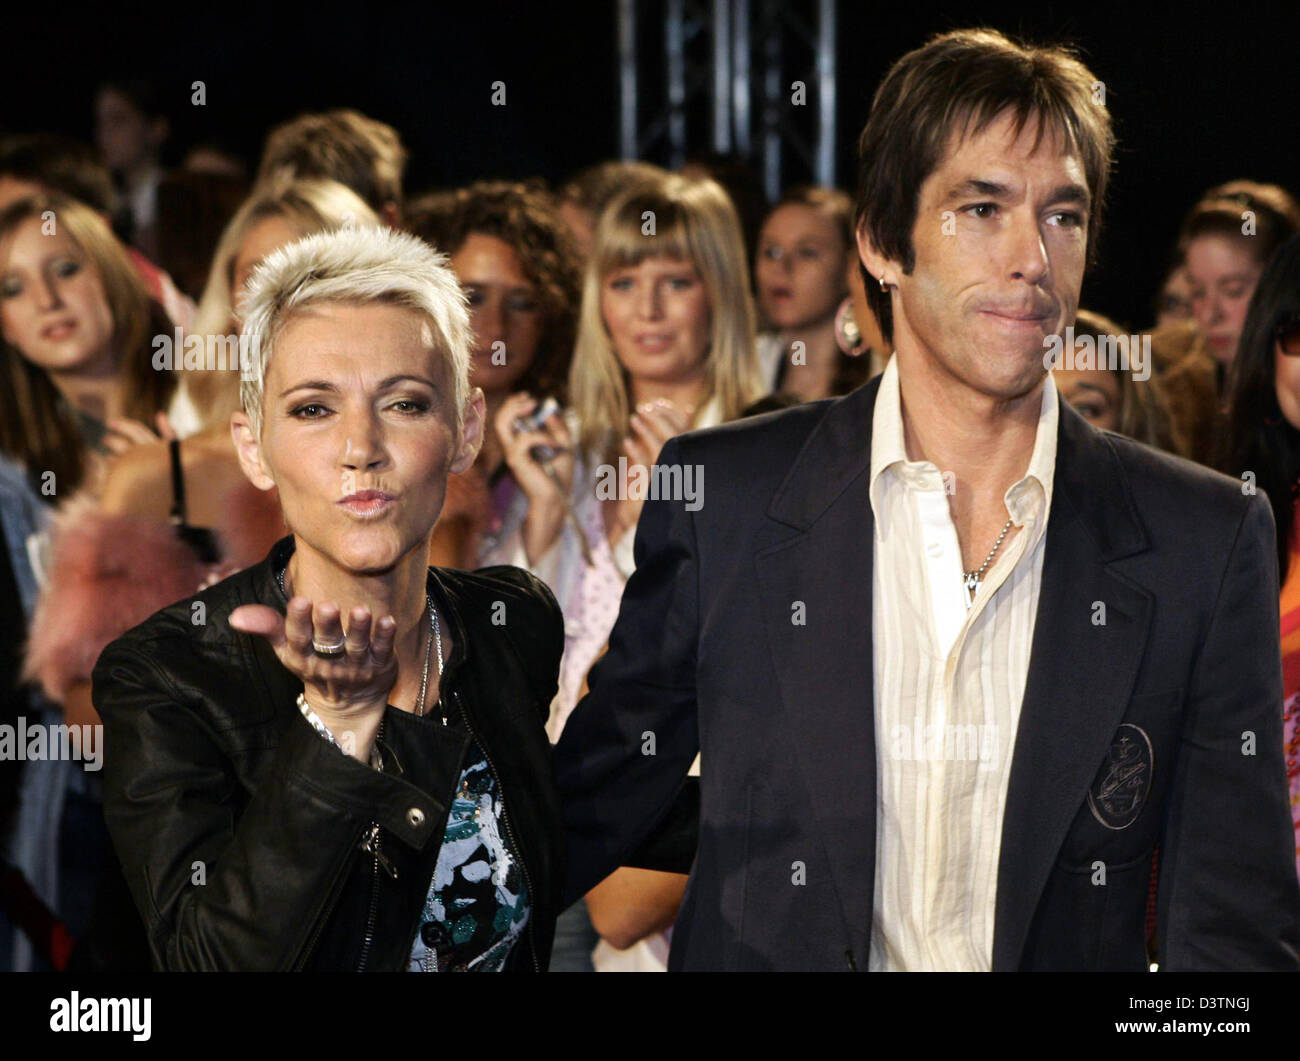 The duo 'Roxette' (Per Gessle (R) and Marie Fredriksson (L)) pose at the gala on the occasion of the 50 years anniversary of the youth newspaper 'Bravo' in Hamburg, Germany, Saturday, 21 October 2006. Photo: Ulrich Perrey Stock Photo